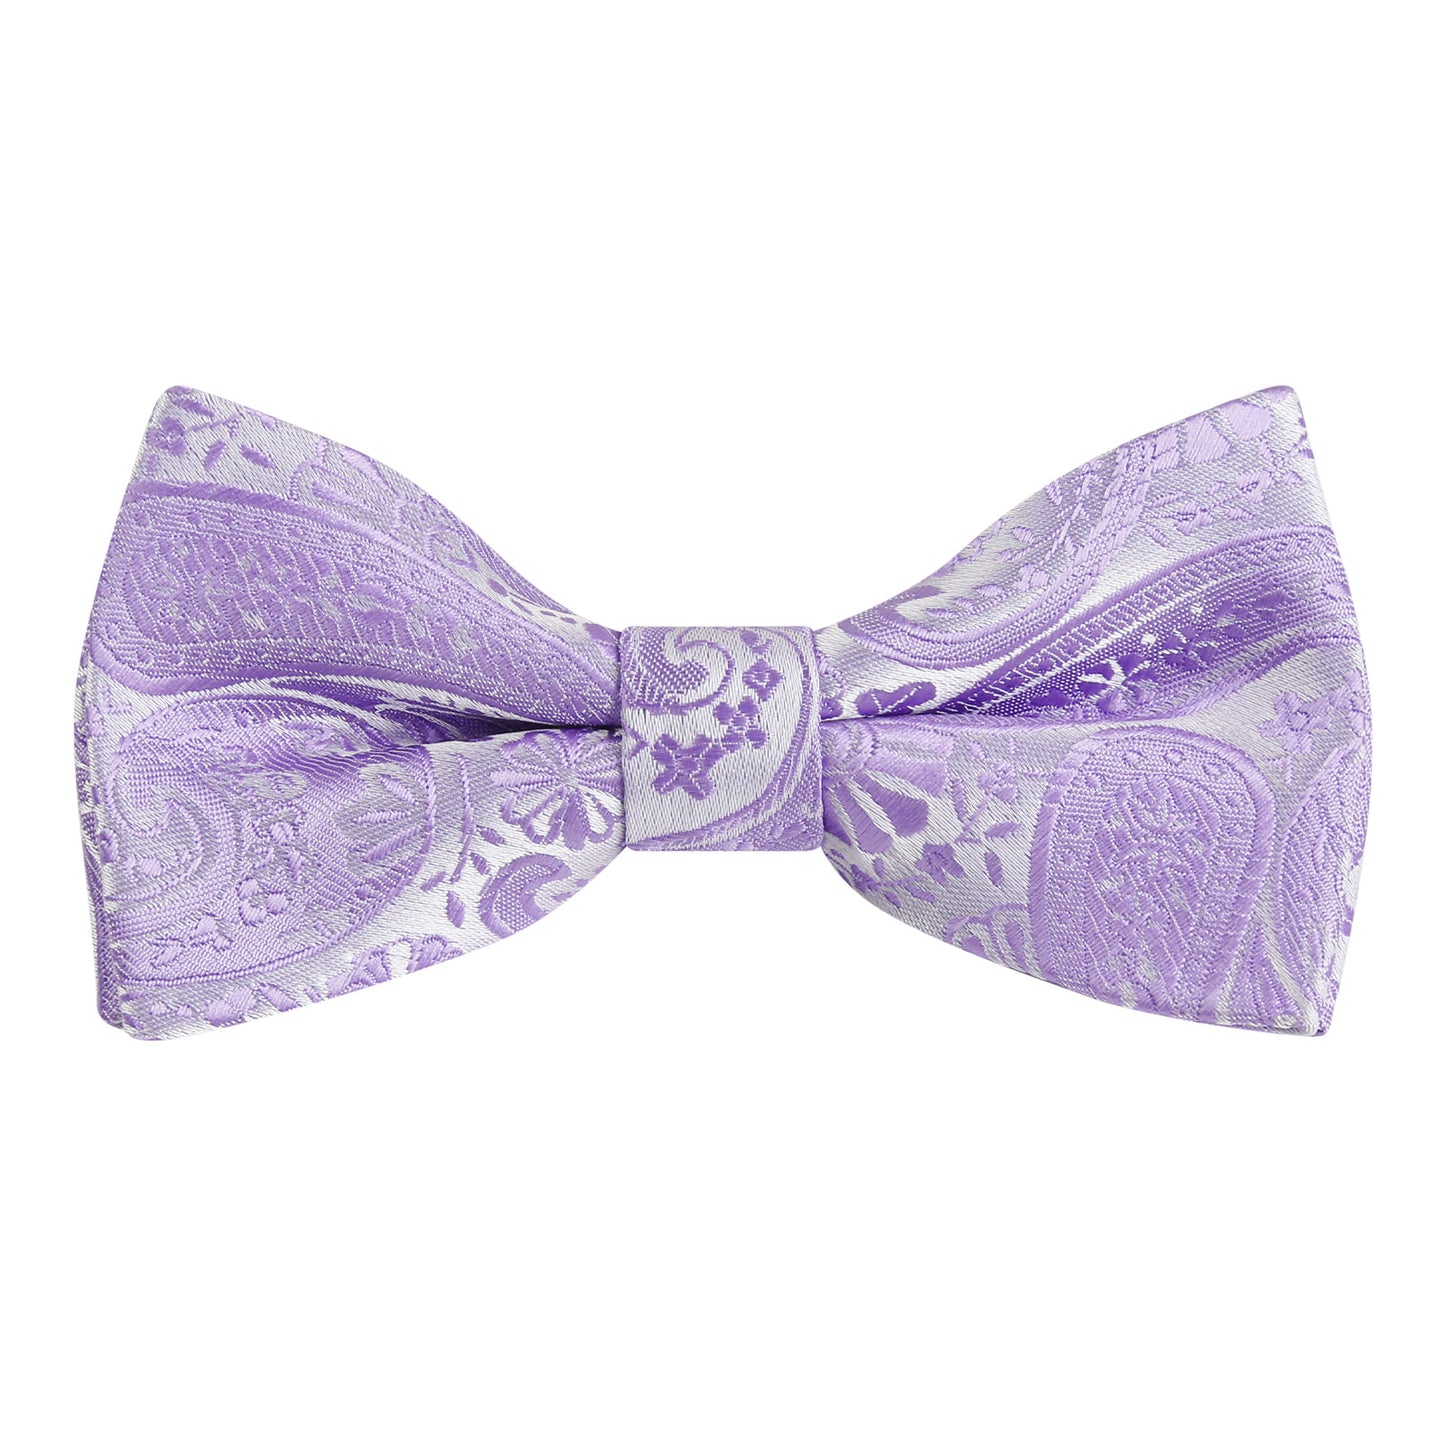 Alizeal Boy's Classic Paisley Bow Tie Pre-tied, 017